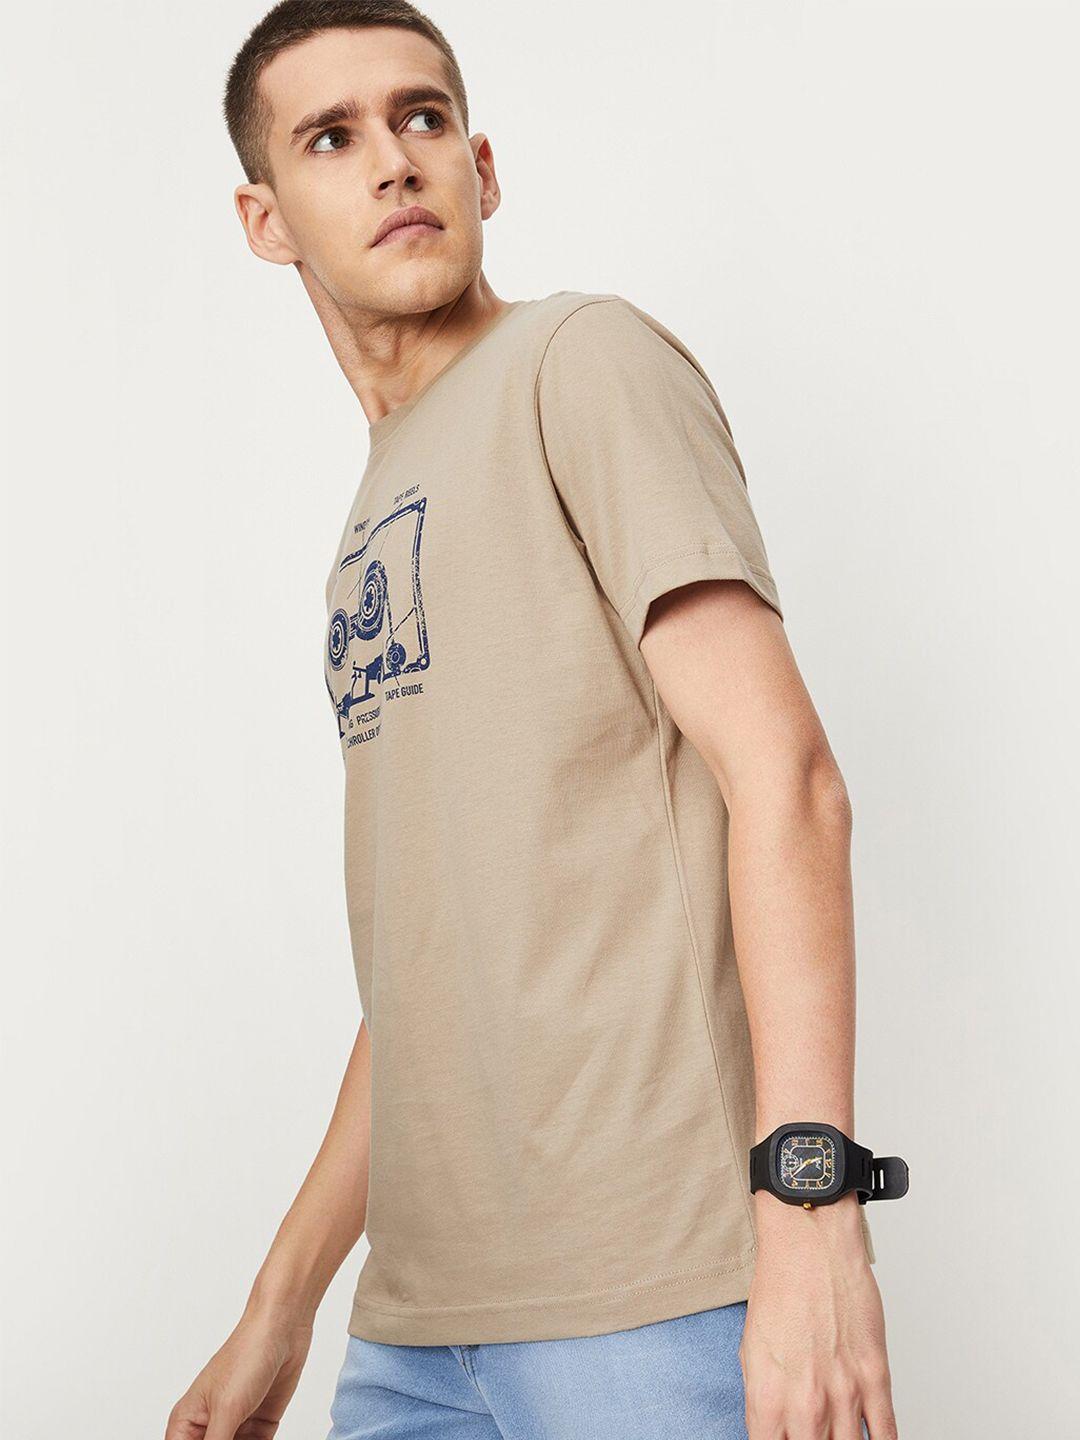 max-graphic-printed-pure-cotton-t-shirt